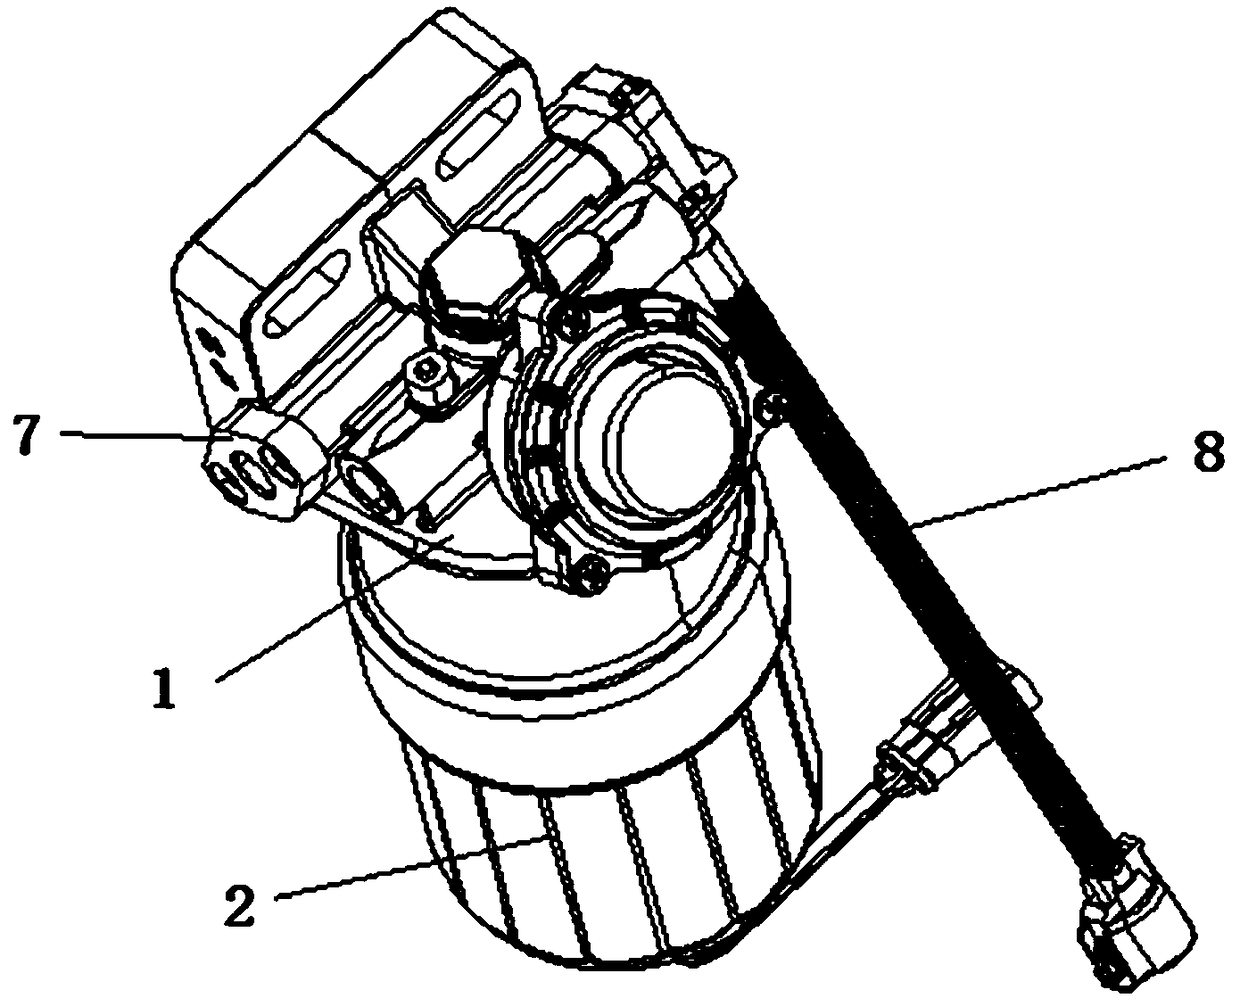 Mounting structure for adapter of diesel oil filter